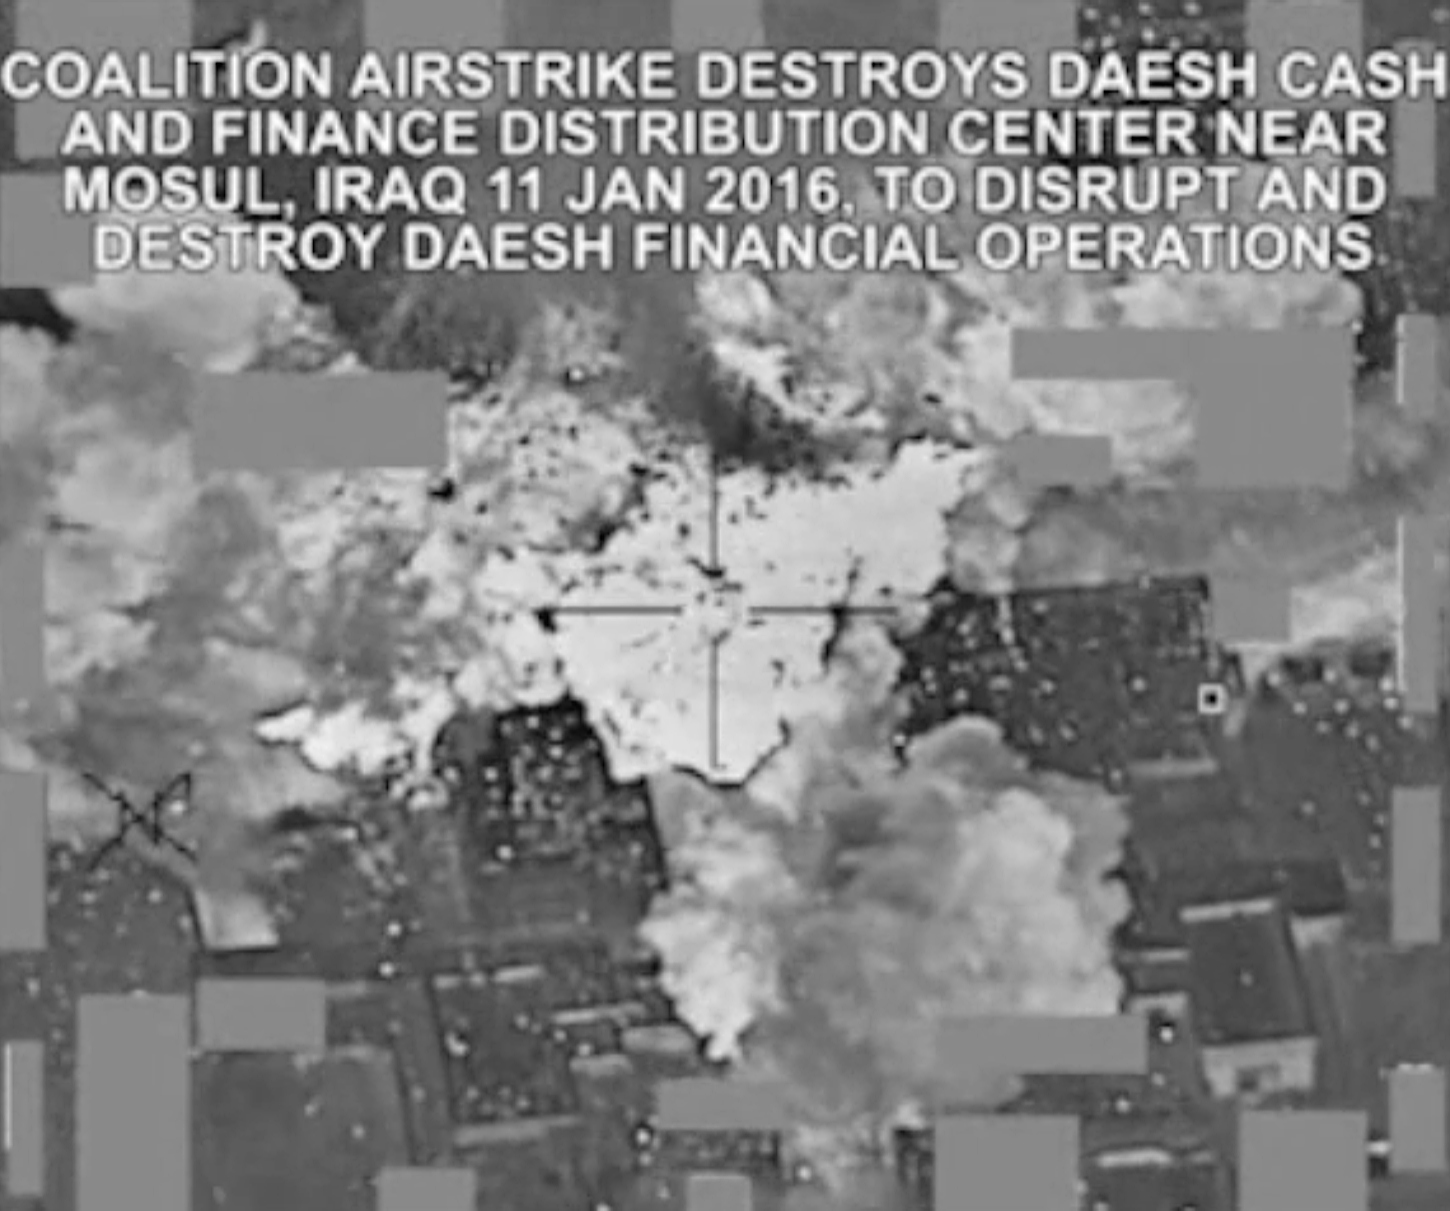 PHOTO: This image made from Jan. 11, 2016 video released by the U.S. military shows an airstrike targeting an Islamic State group cash and finance distribution center near Mosul, Iraq.